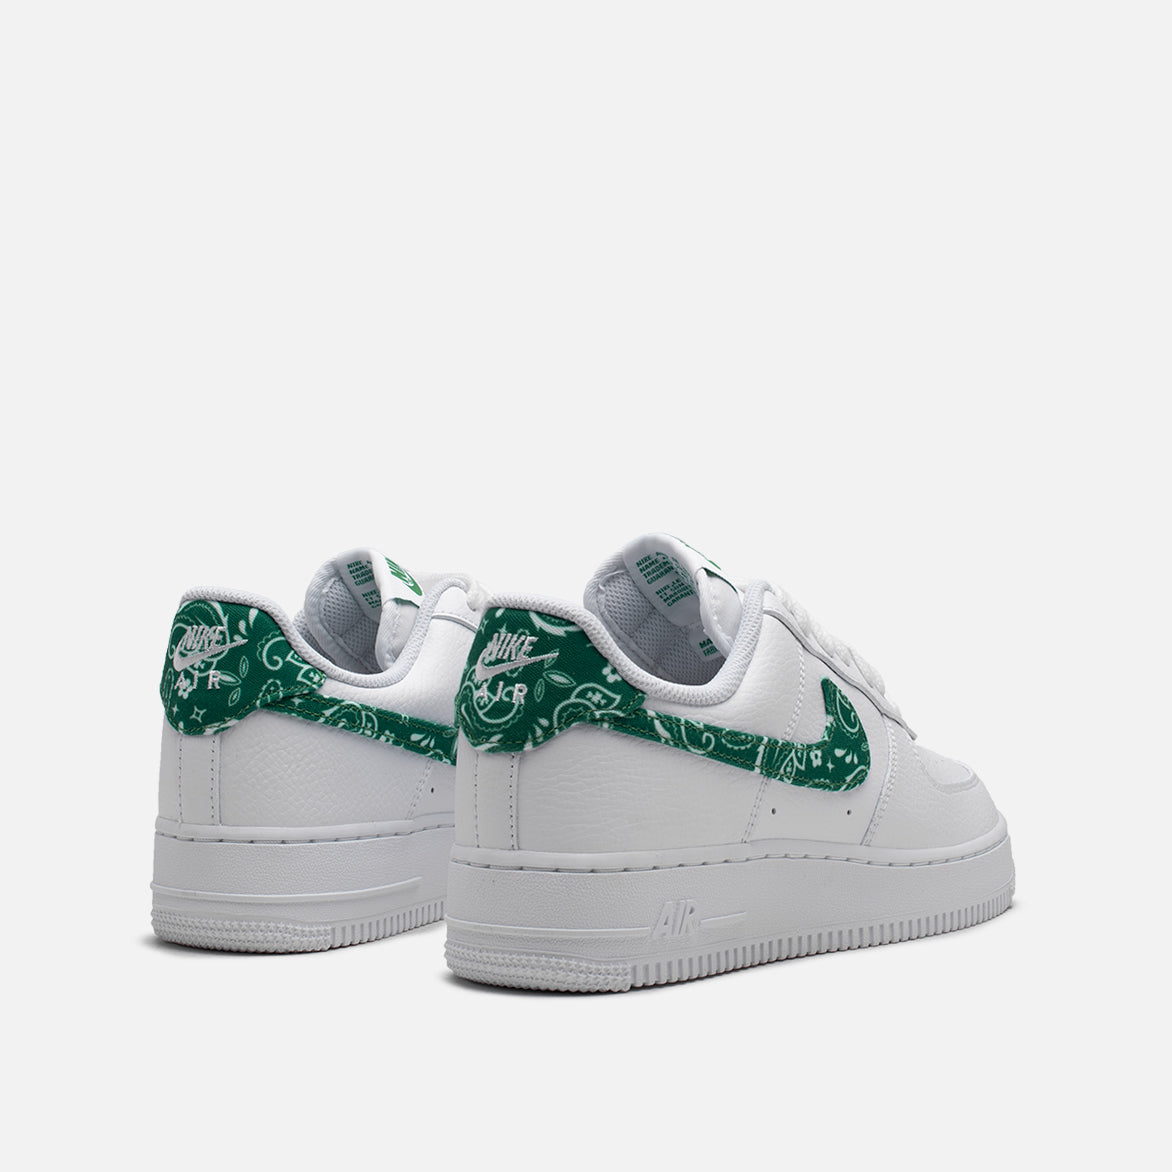 WMNS AIR FORCE 1 `07 ESS "GREEN PAISLEY"